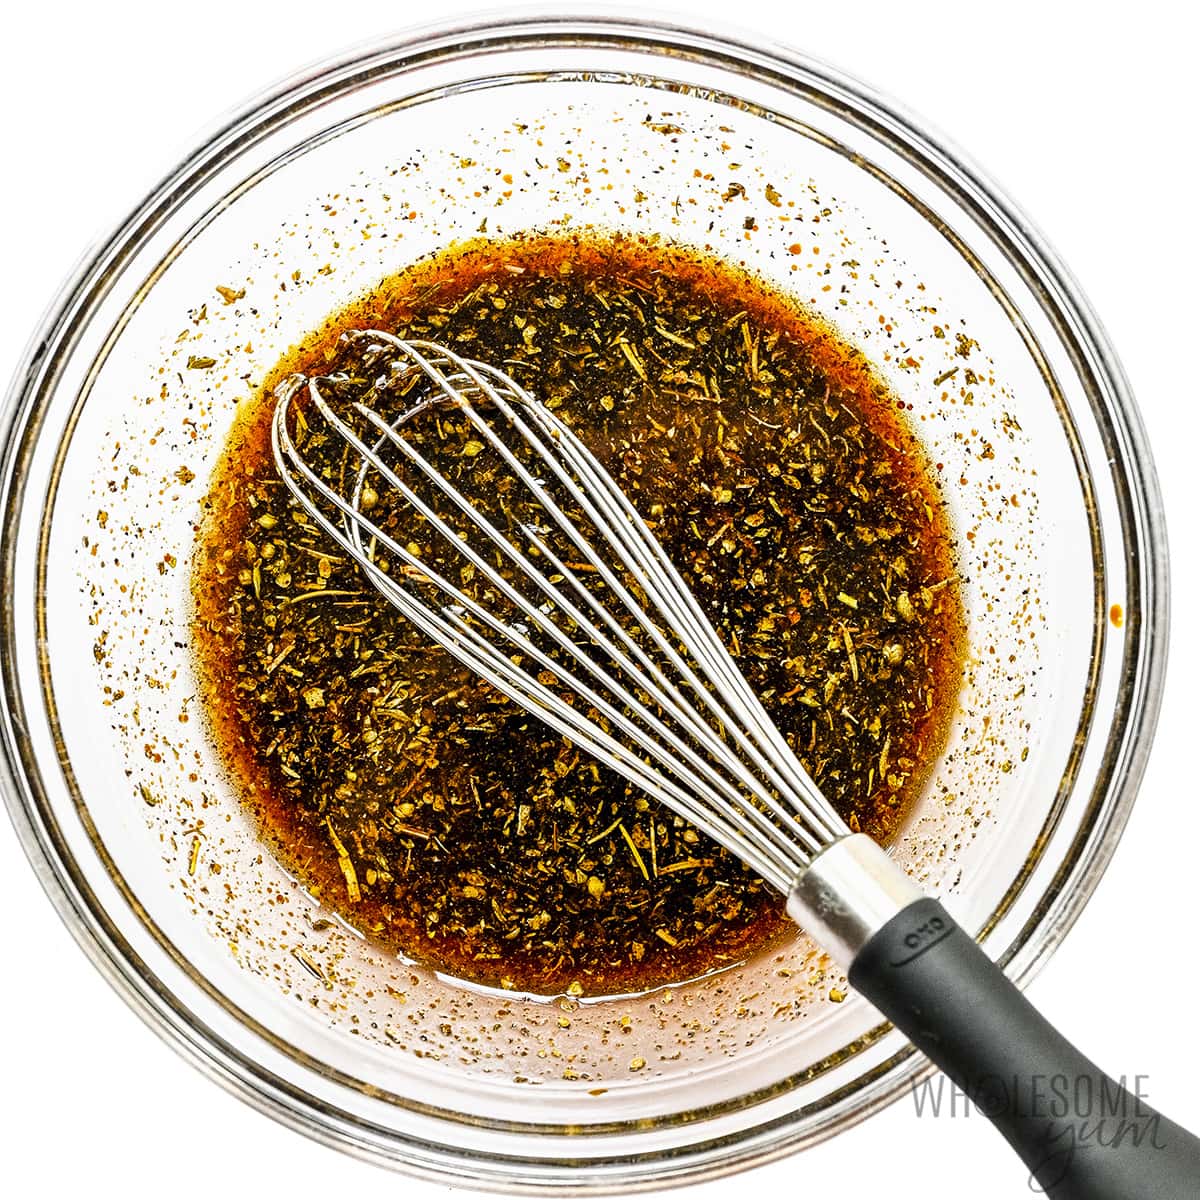 Marinade whisked together in a bowl.